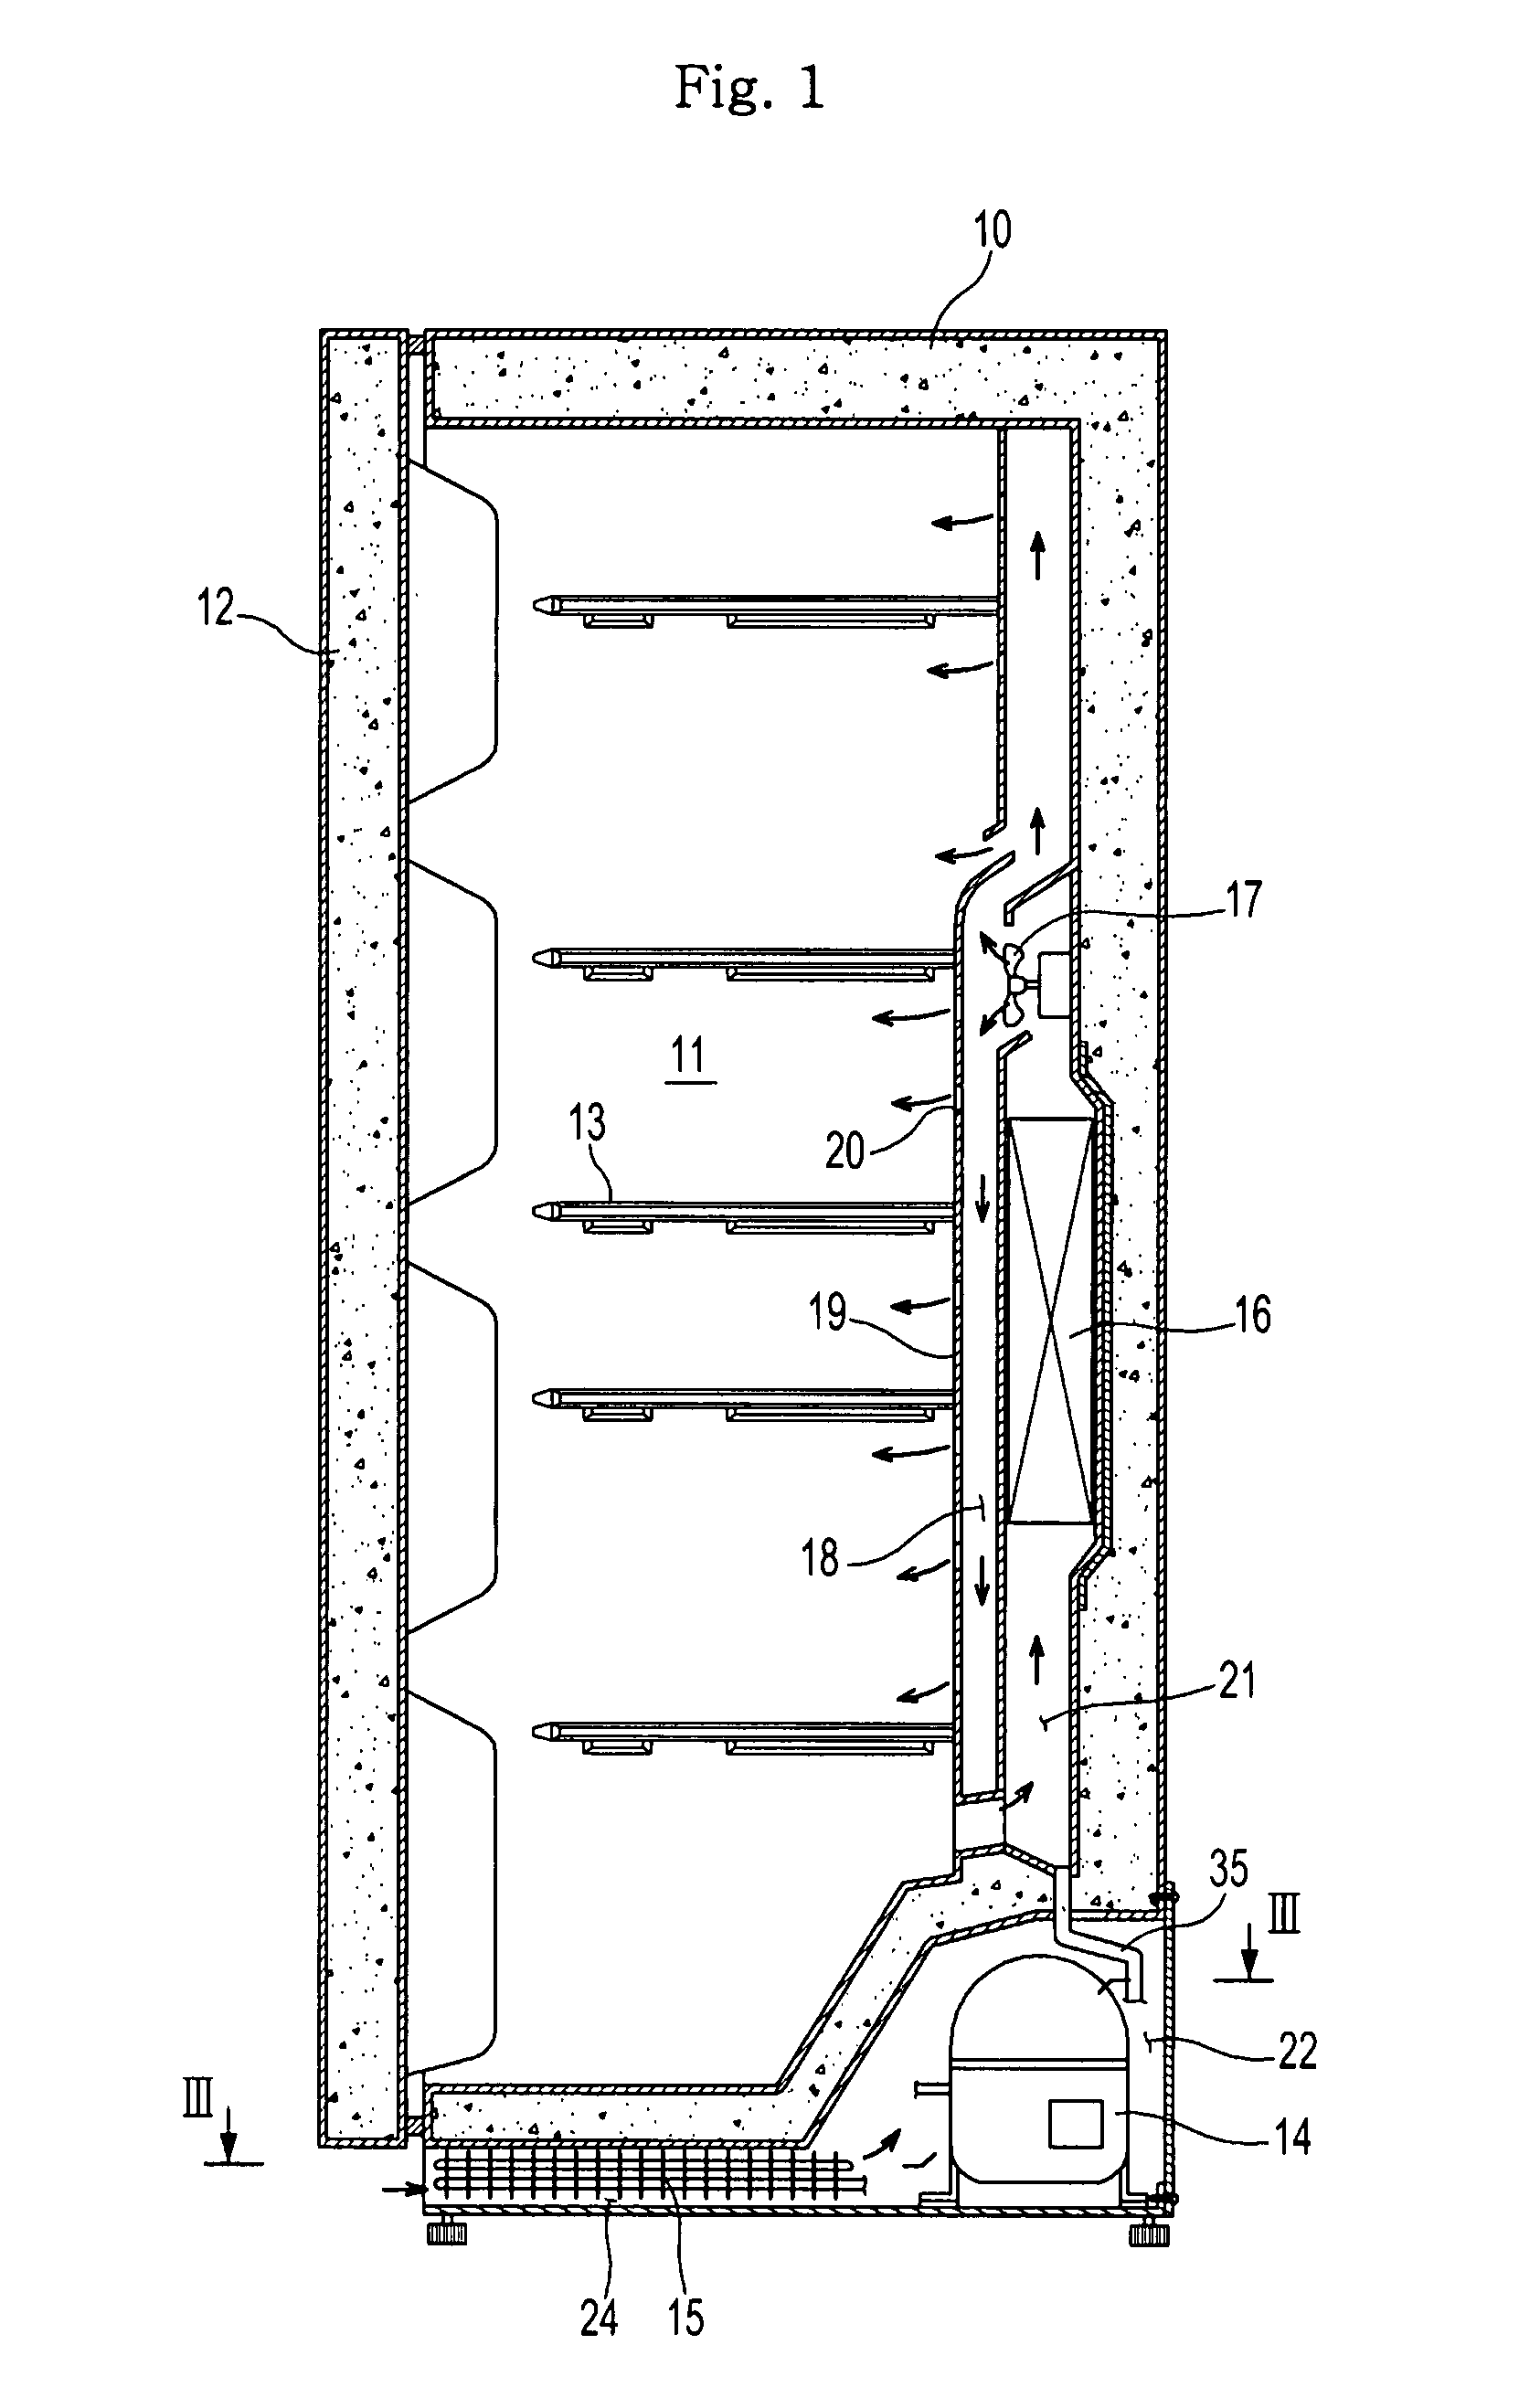 Refrigerator with air guide duct